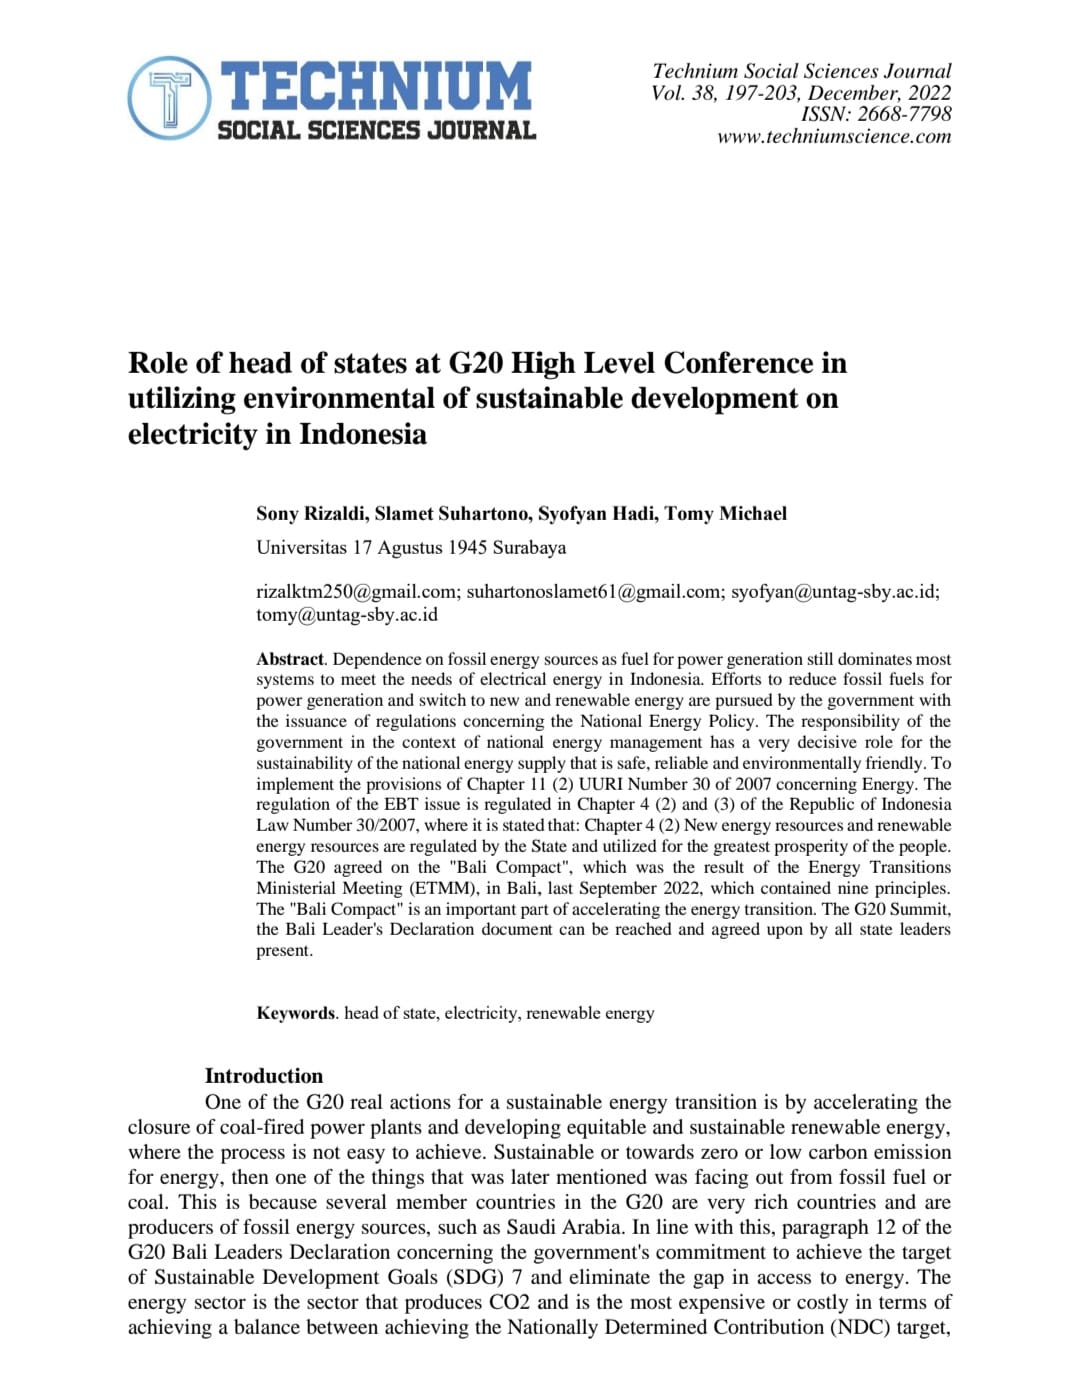 Role of head of states at G20 High Level Conference in�utilizing environmental karya Sony R